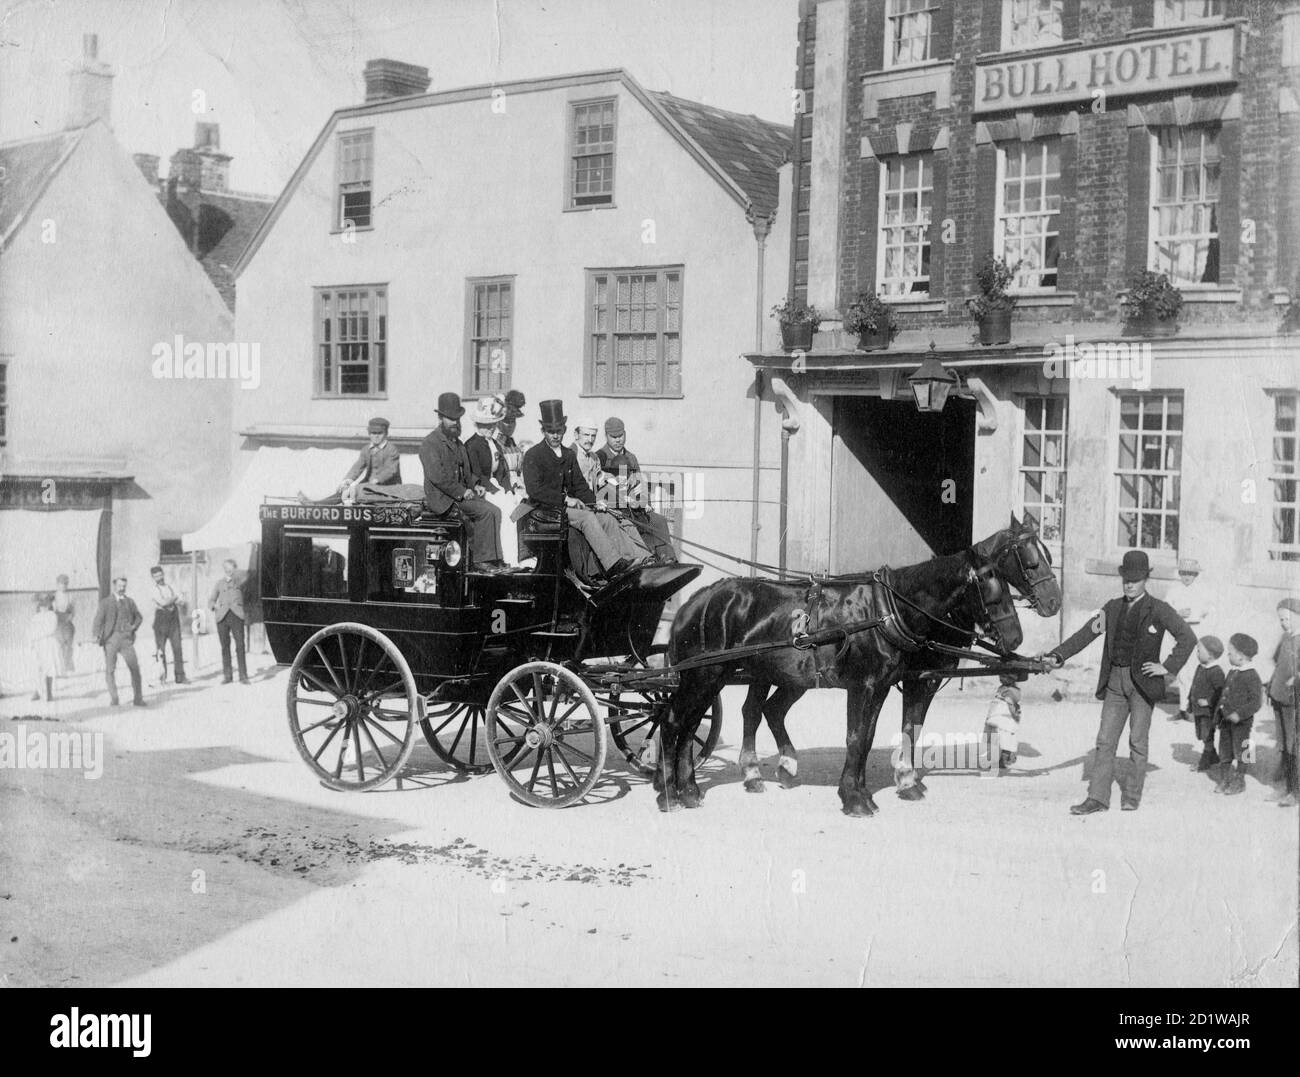 High Street, Burford, West Oxfordshire, Oxfordshire. A horse drawn bus and passengers waiting in the street outside the hotel, originally 16th century, but with an 18th century facade, watched by local children. Stock Photo